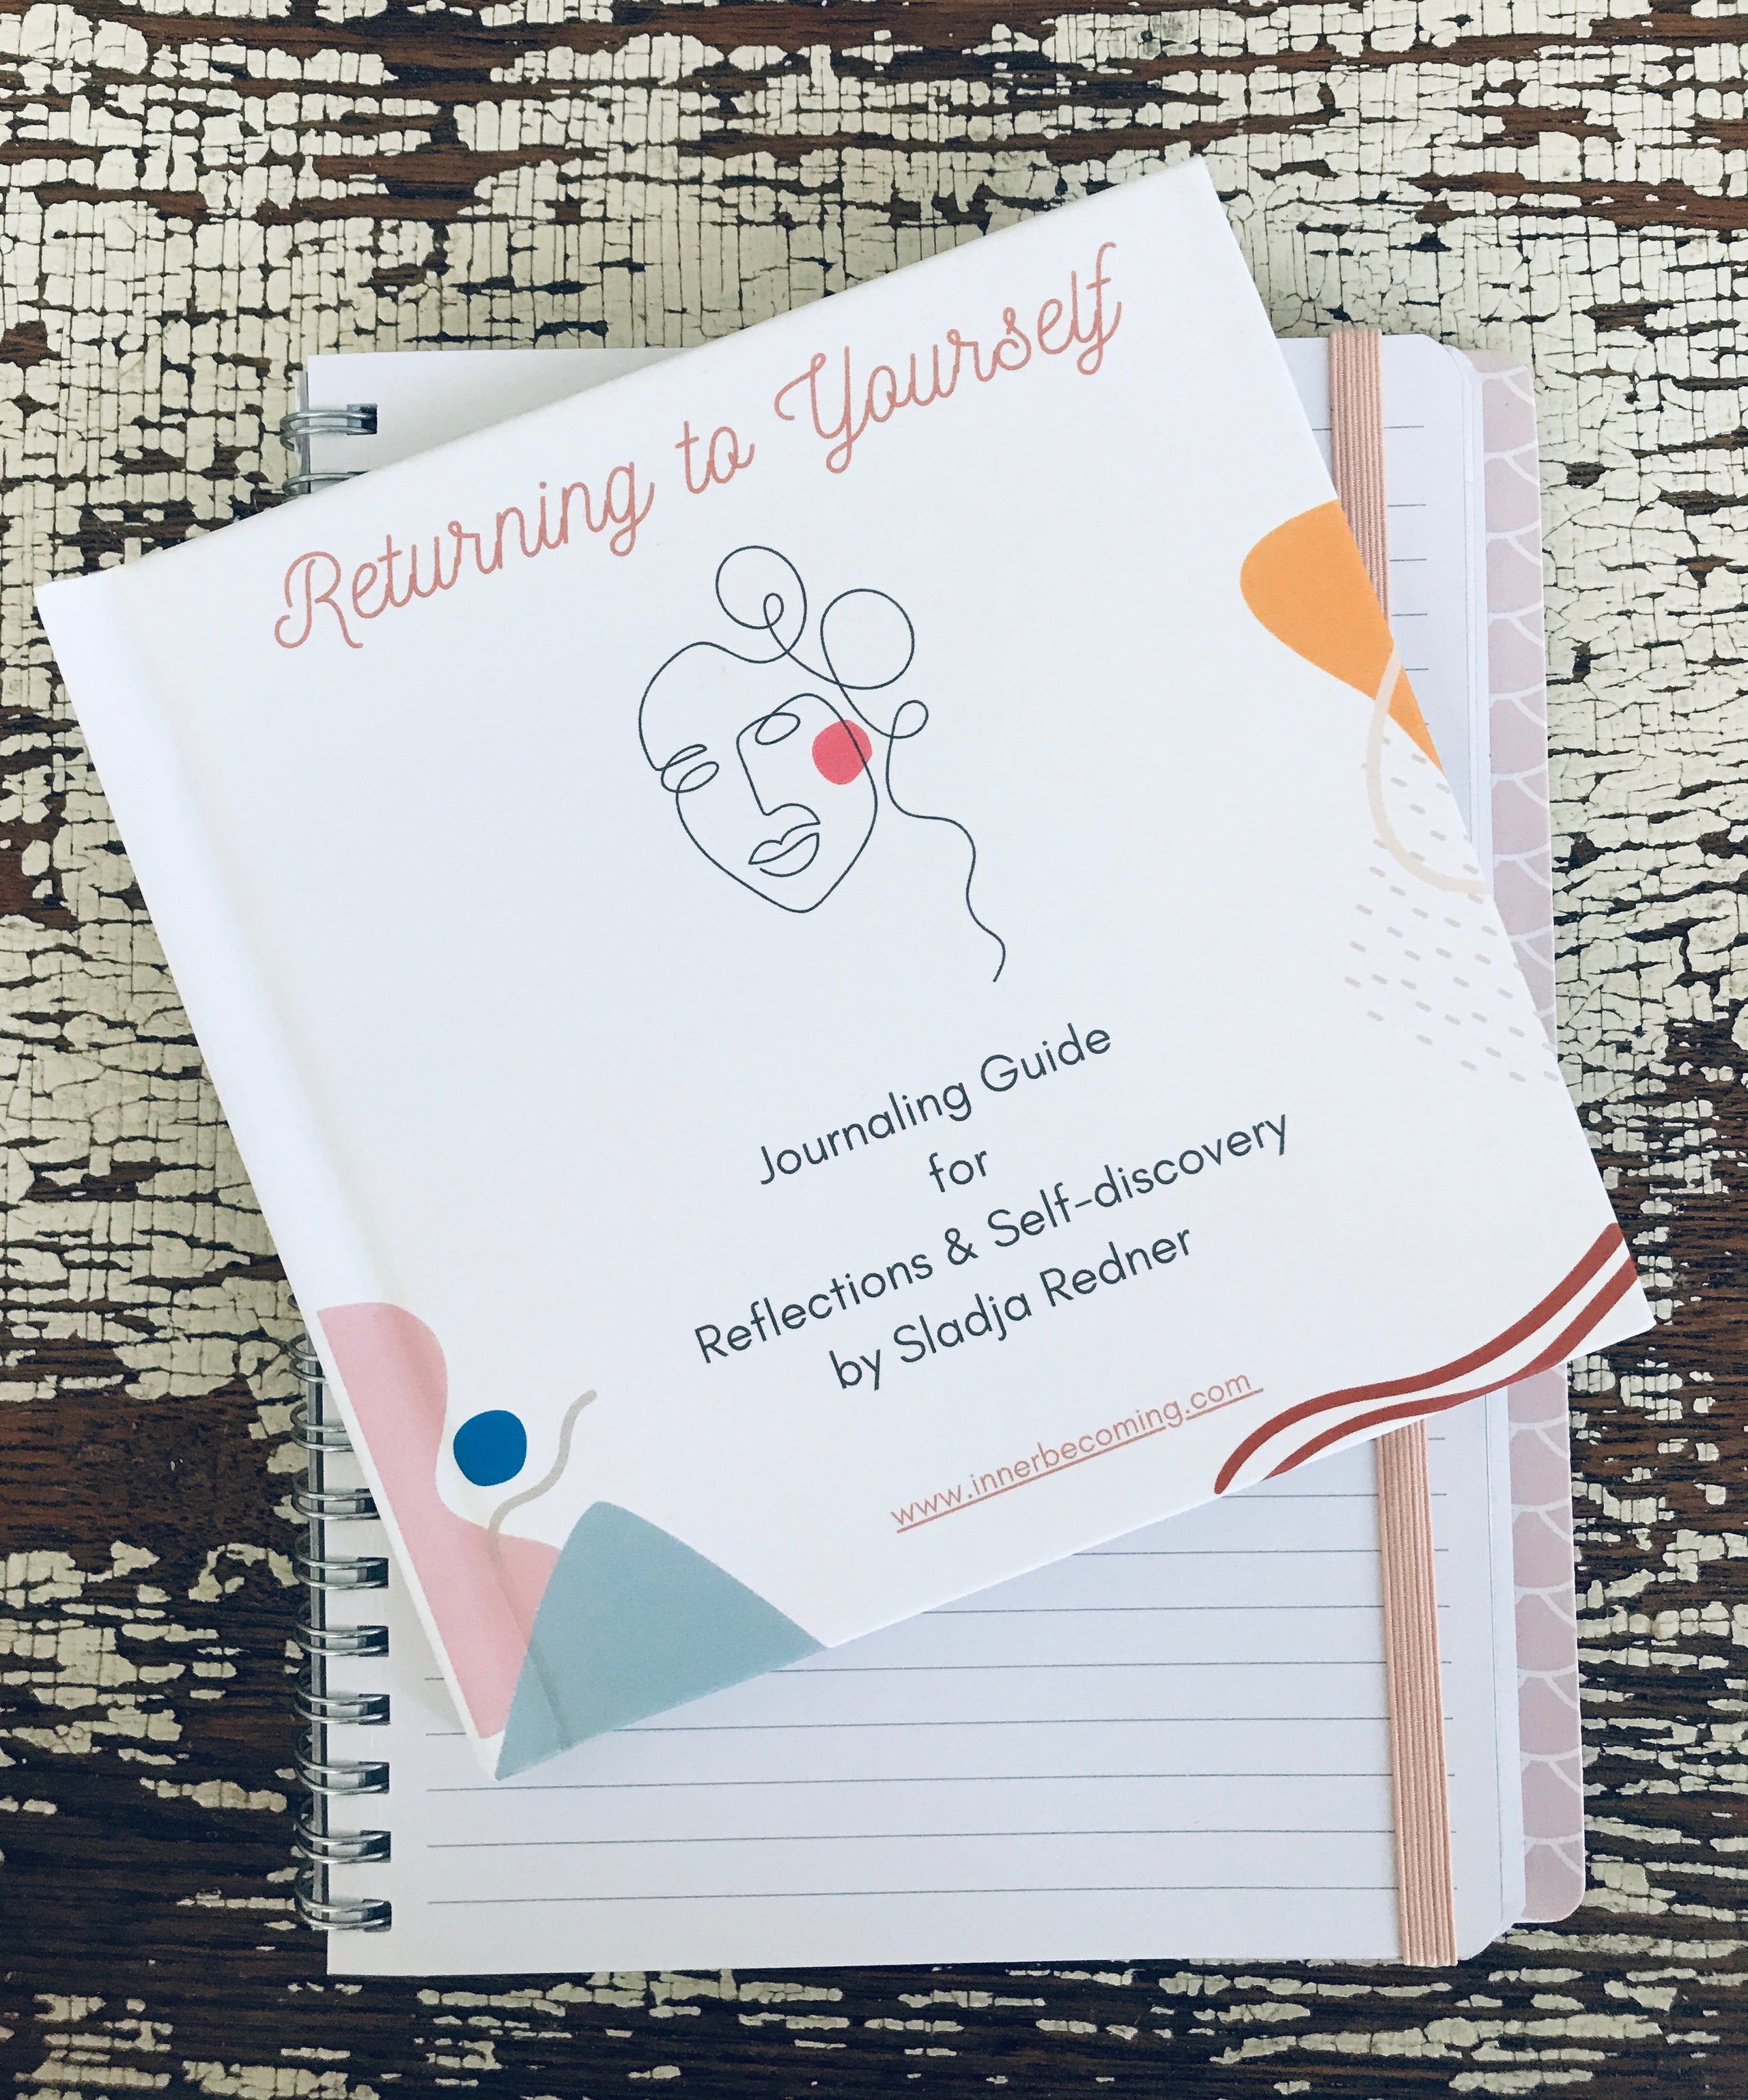 Guided Journal For Reflections And Self Discovery